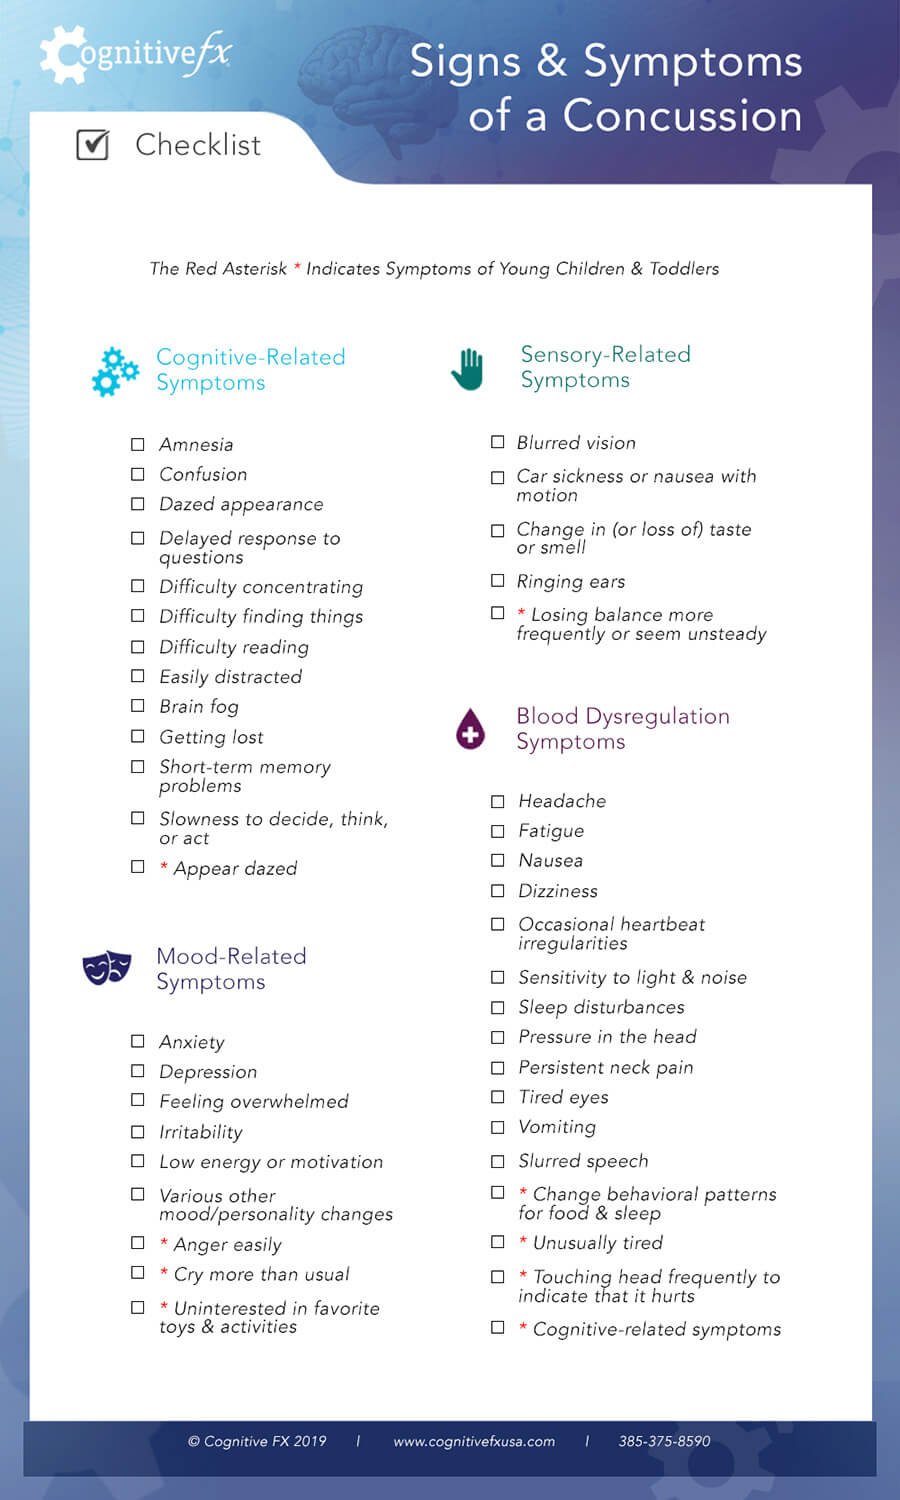 Checklist of cognitive-related symptoms and sensory-related symptoms for adults and children.